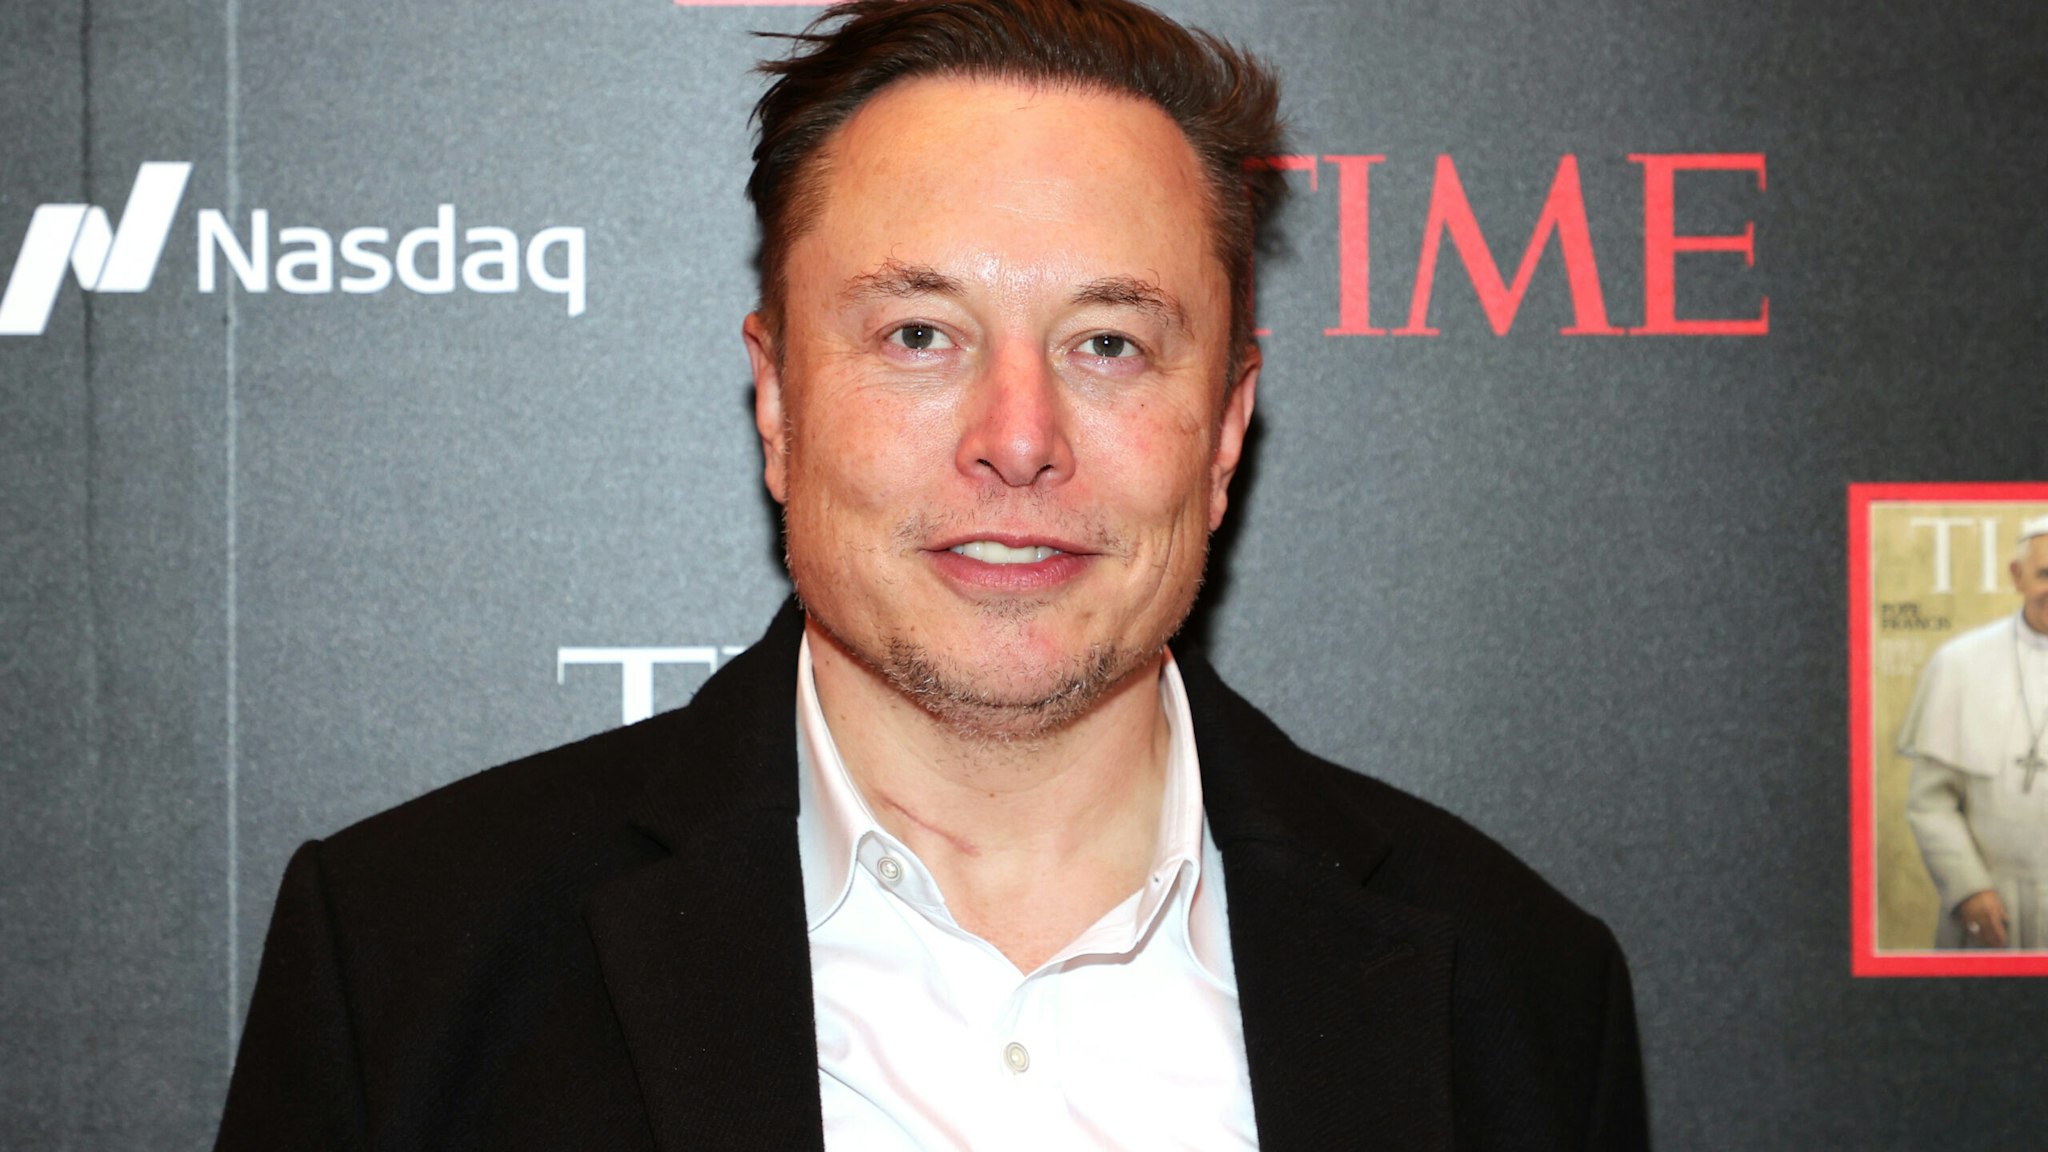 NEW YORK, NEW YORK - DECEMBER 13: Elon Musk attends TIME Person of the Year on December 13, 2021 in New York City. (Photo by Theo Wargo/Getty Images for TIME)